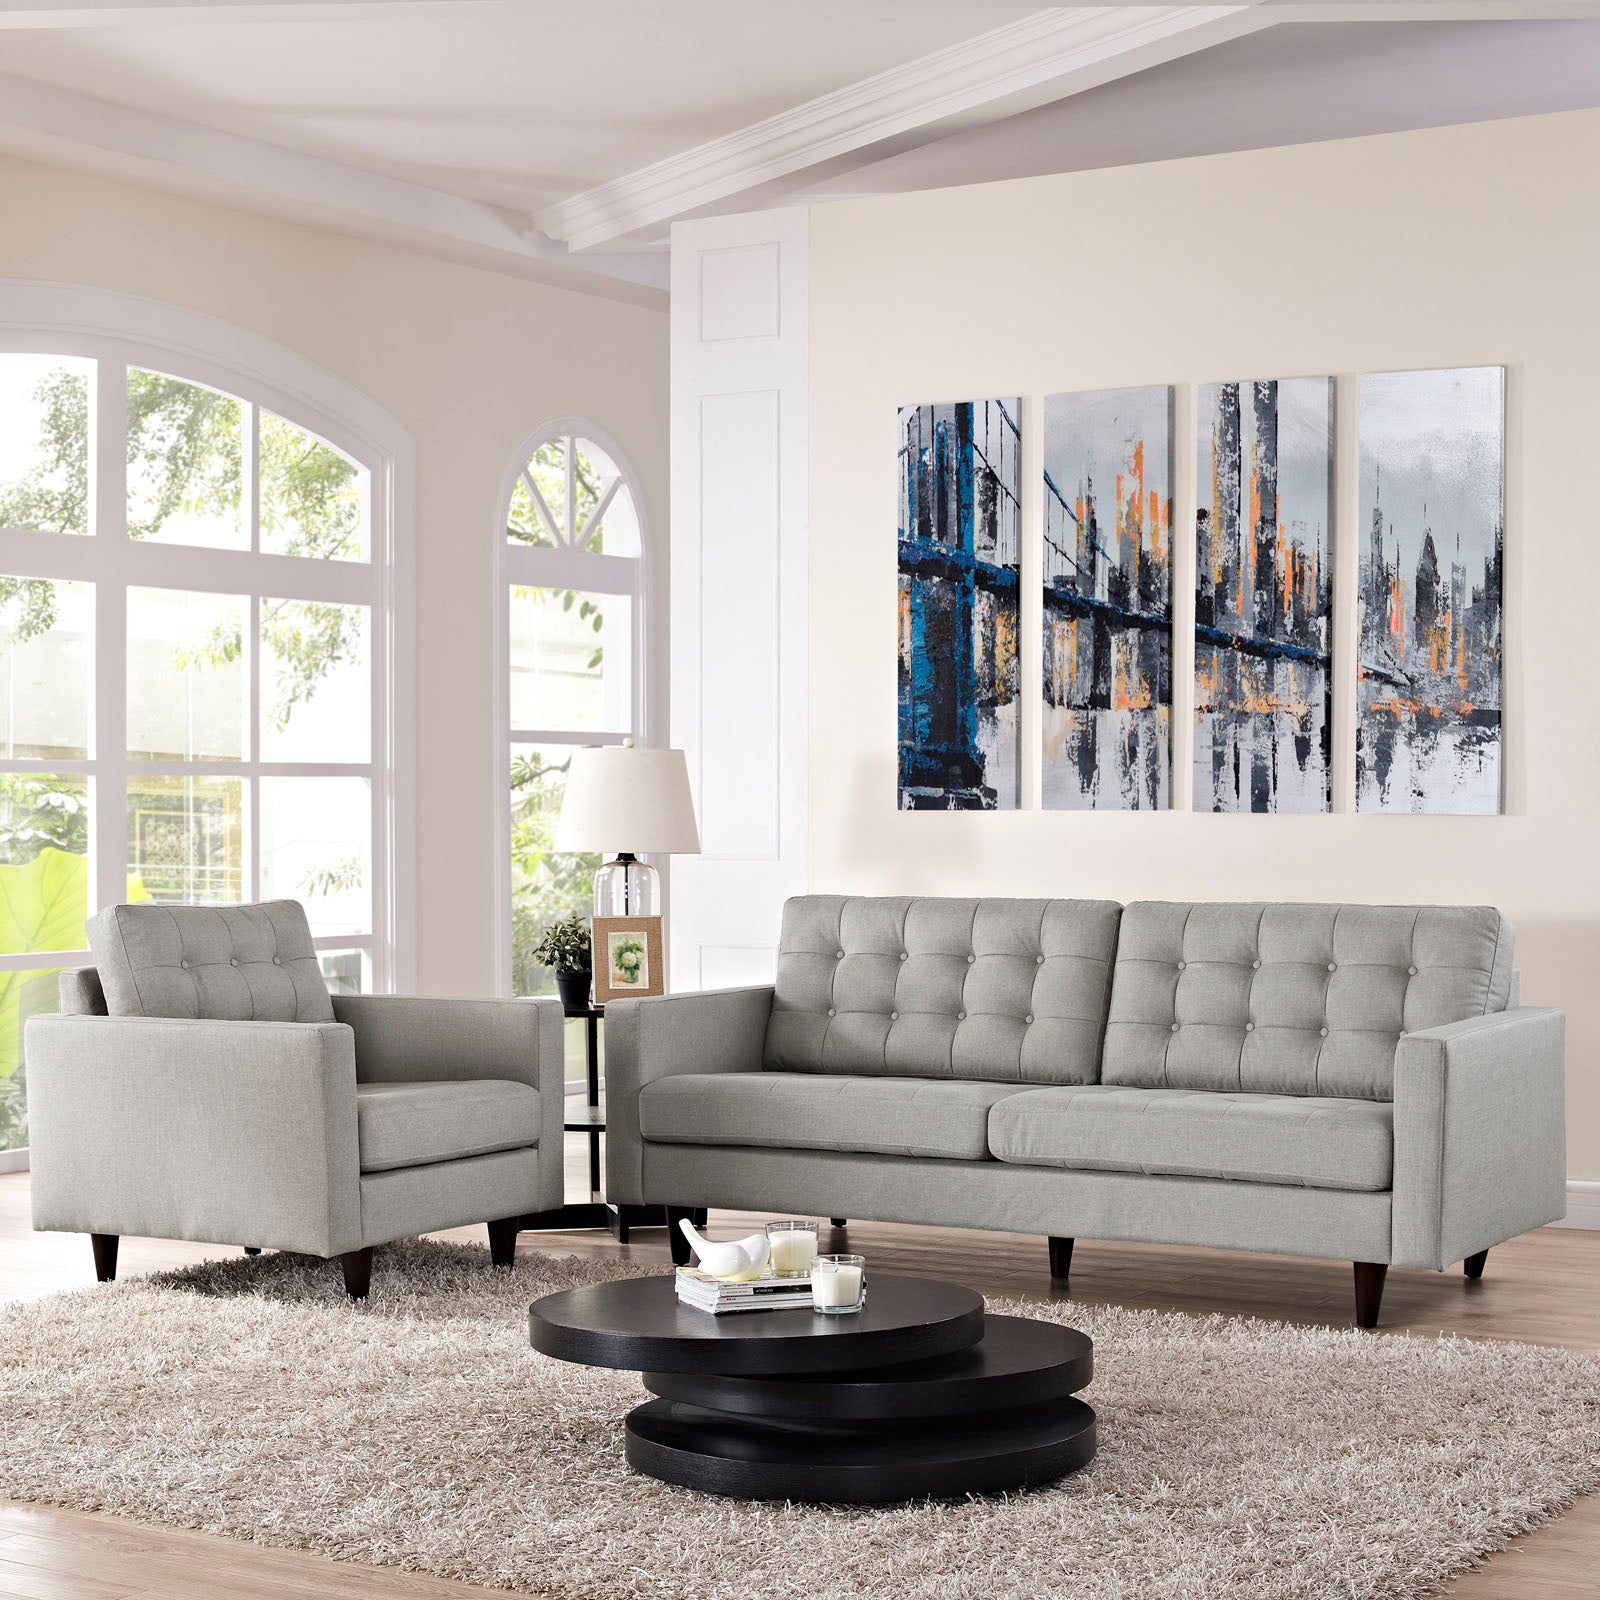 Modway Living Room Sets - Empress Armchair And Sofa Set Of 2 Light Gray